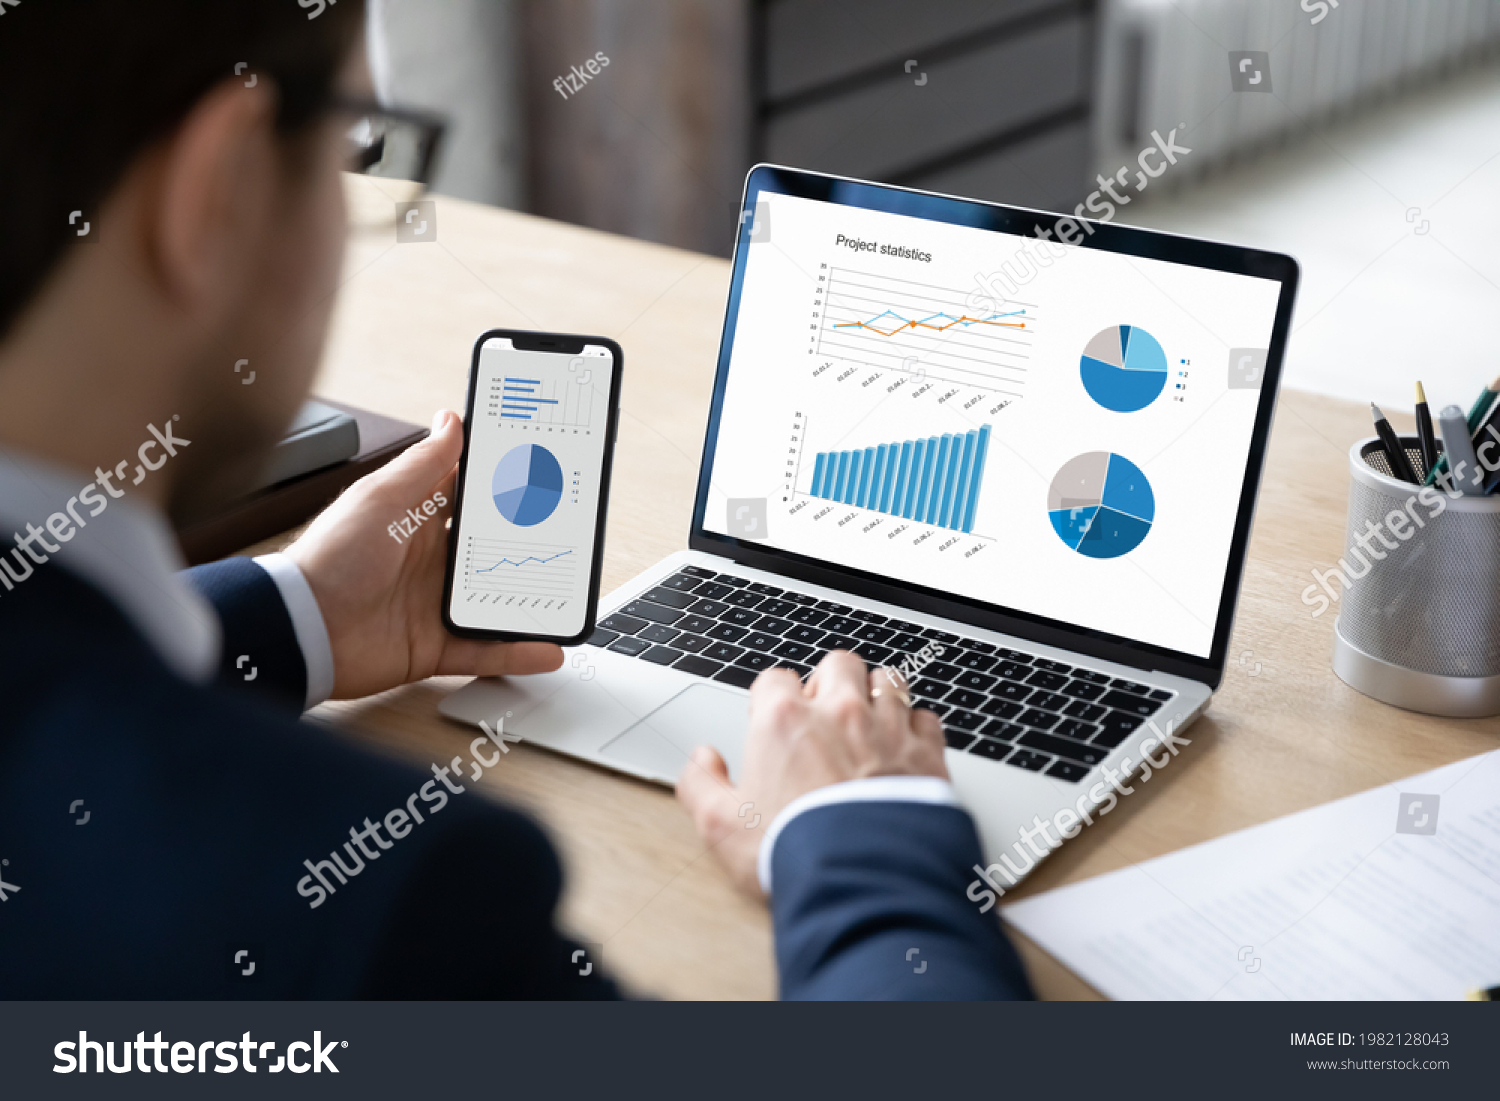 Business marketer using professional app for marketing data analyzing on laptop and smartphone screens, studying financial graphs, comparing diagrams on phone and computer. Analysis concept #1982128043